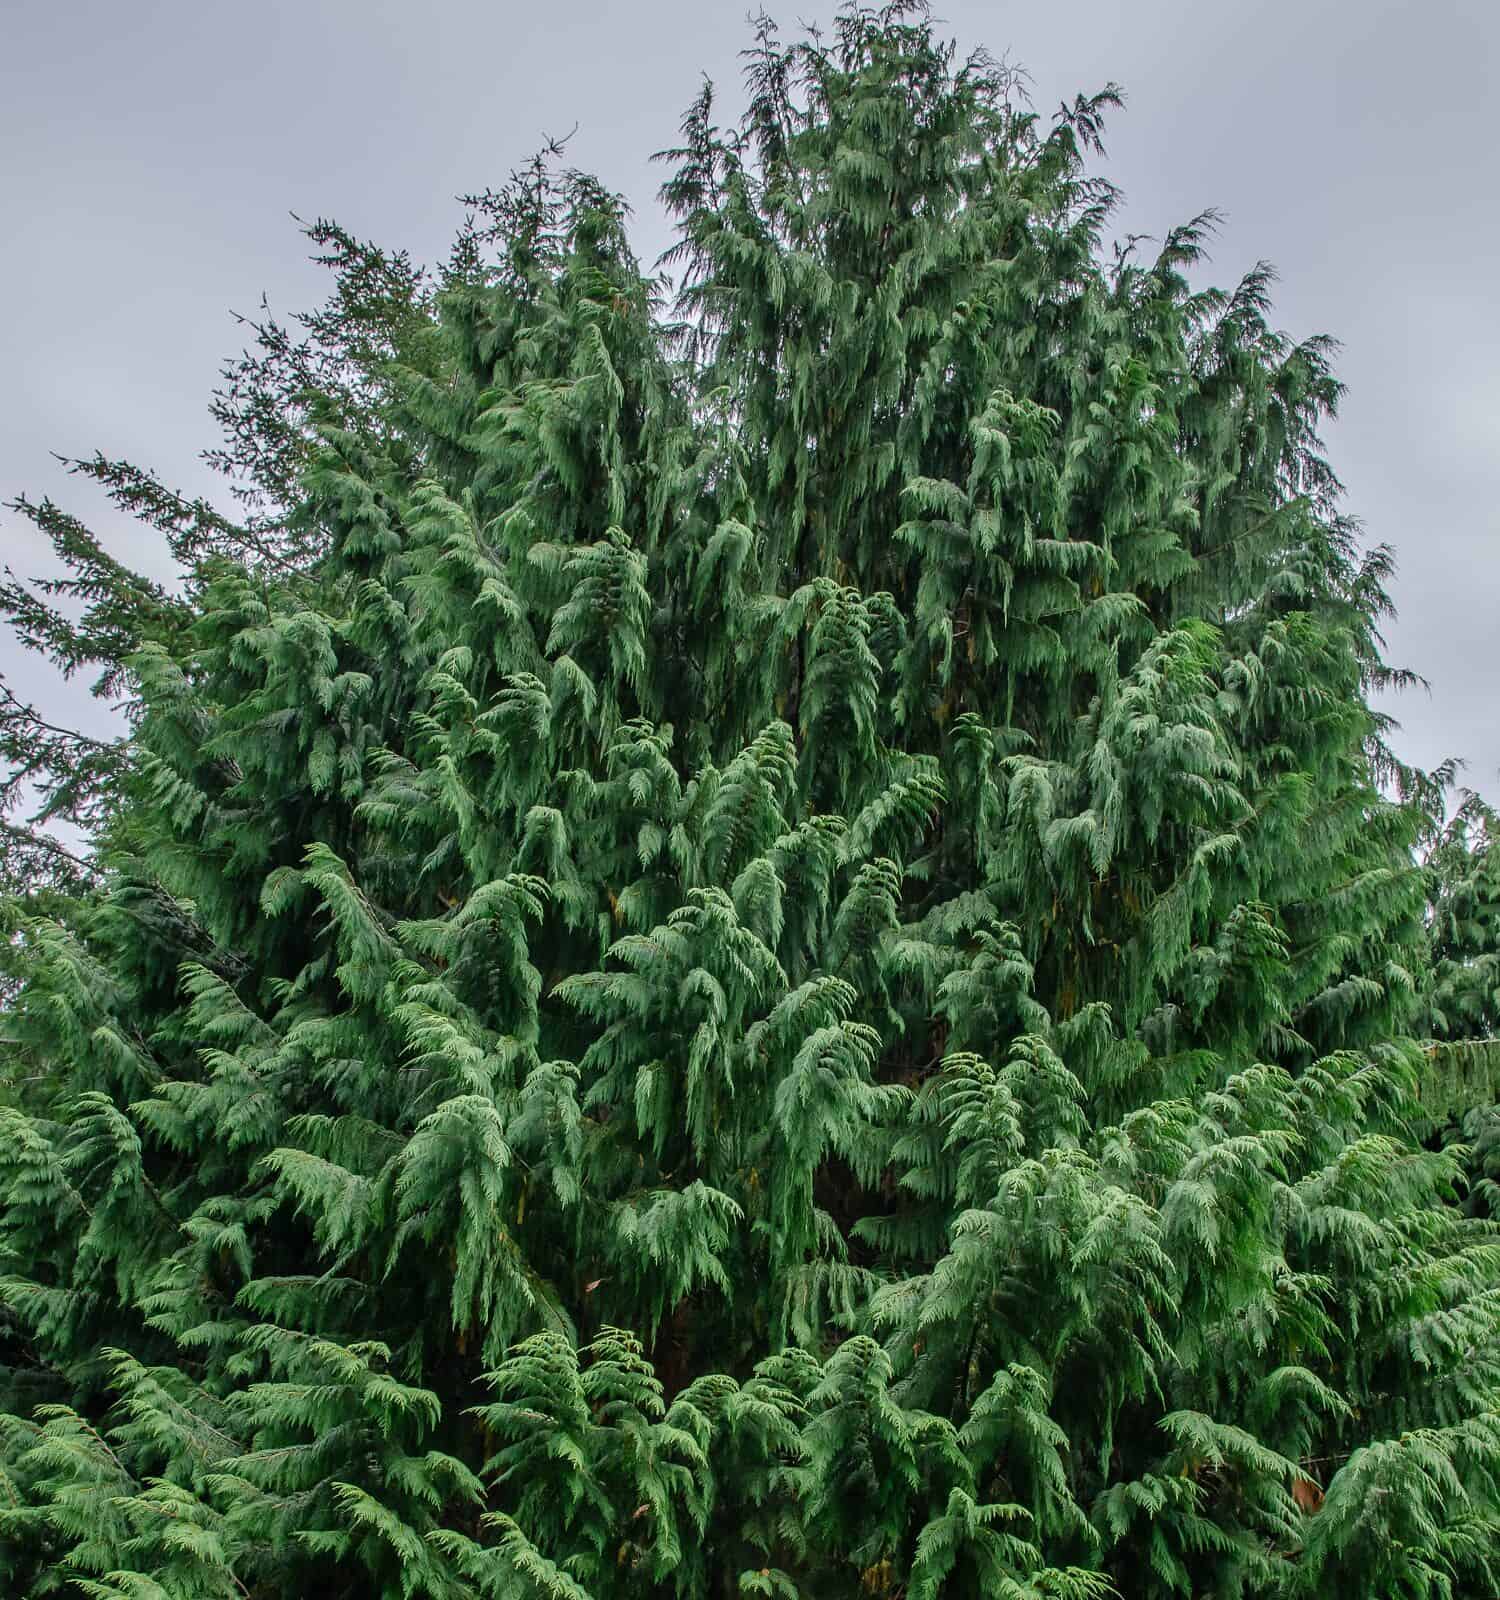 Chamaecyparis nootkatensis is a tall evergreen conifer. Common names: Nootka cypress, yellow cypress, Alaska cypress, Nootka cedar, yellow cedar, Alaska cedar, and Alaska yellow cedar. 